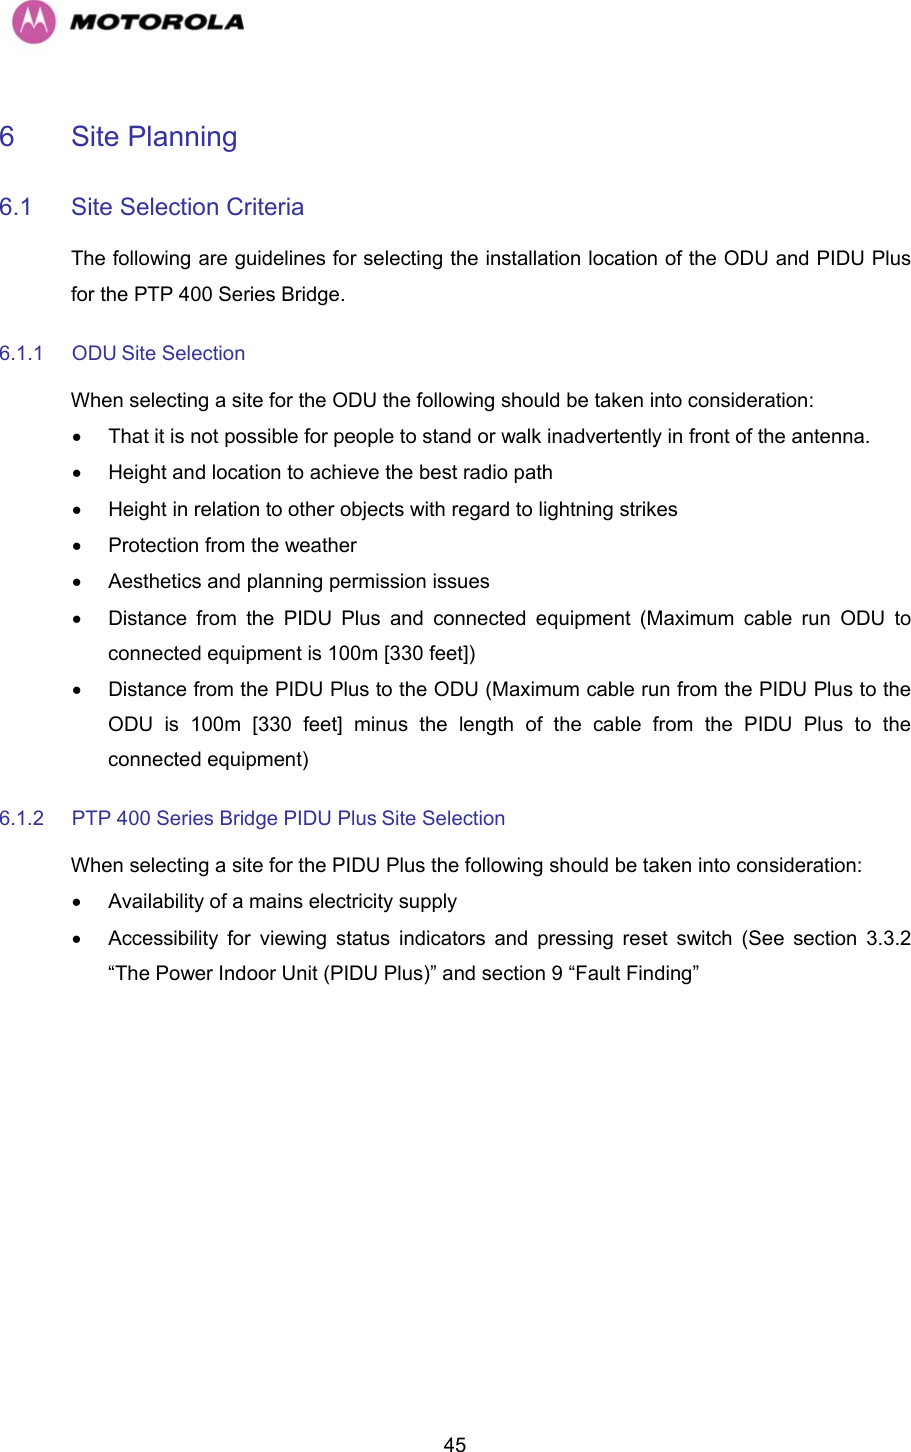   456 Site Planning  6.1 Site Selection Criteria  The following are guidelines for selecting the installation location of the ODU and PIDU Plus for the PTP 400 Series Bridge.  6.1.1 ODU Site Selection  When selecting a site for the ODU the following should be taken into consideration:  •  That it is not possible for people to stand or walk inadvertently in front of the antenna.  •  Height and location to achieve the best radio path  •  Height in relation to other objects with regard to lightning strikes  • Protection from the weather  •  Aesthetics and planning permission issues  •  Distance from the PIDU Plus and connected equipment (Maximum cable run ODU to connected equipment is 100m [330 feet])  •  Distance from the PIDU Plus to the ODU (Maximum cable run from the PIDU Plus to the ODU is 100m [330 feet] minus the length of the cable from the PIDU Plus to the connected equipment)  6.1.2  PTP 400 Series Bridge PIDU Plus Site Selection  When selecting a site for the PIDU Plus the following should be taken into consideration:  •  Availability of a mains electricity supply  •  Accessibility for viewing status indicators and pressing reset switch (See section 3.3.2 “The Power Indoor Unit (PIDU Plus)” and section 9 “Fault Finding”  